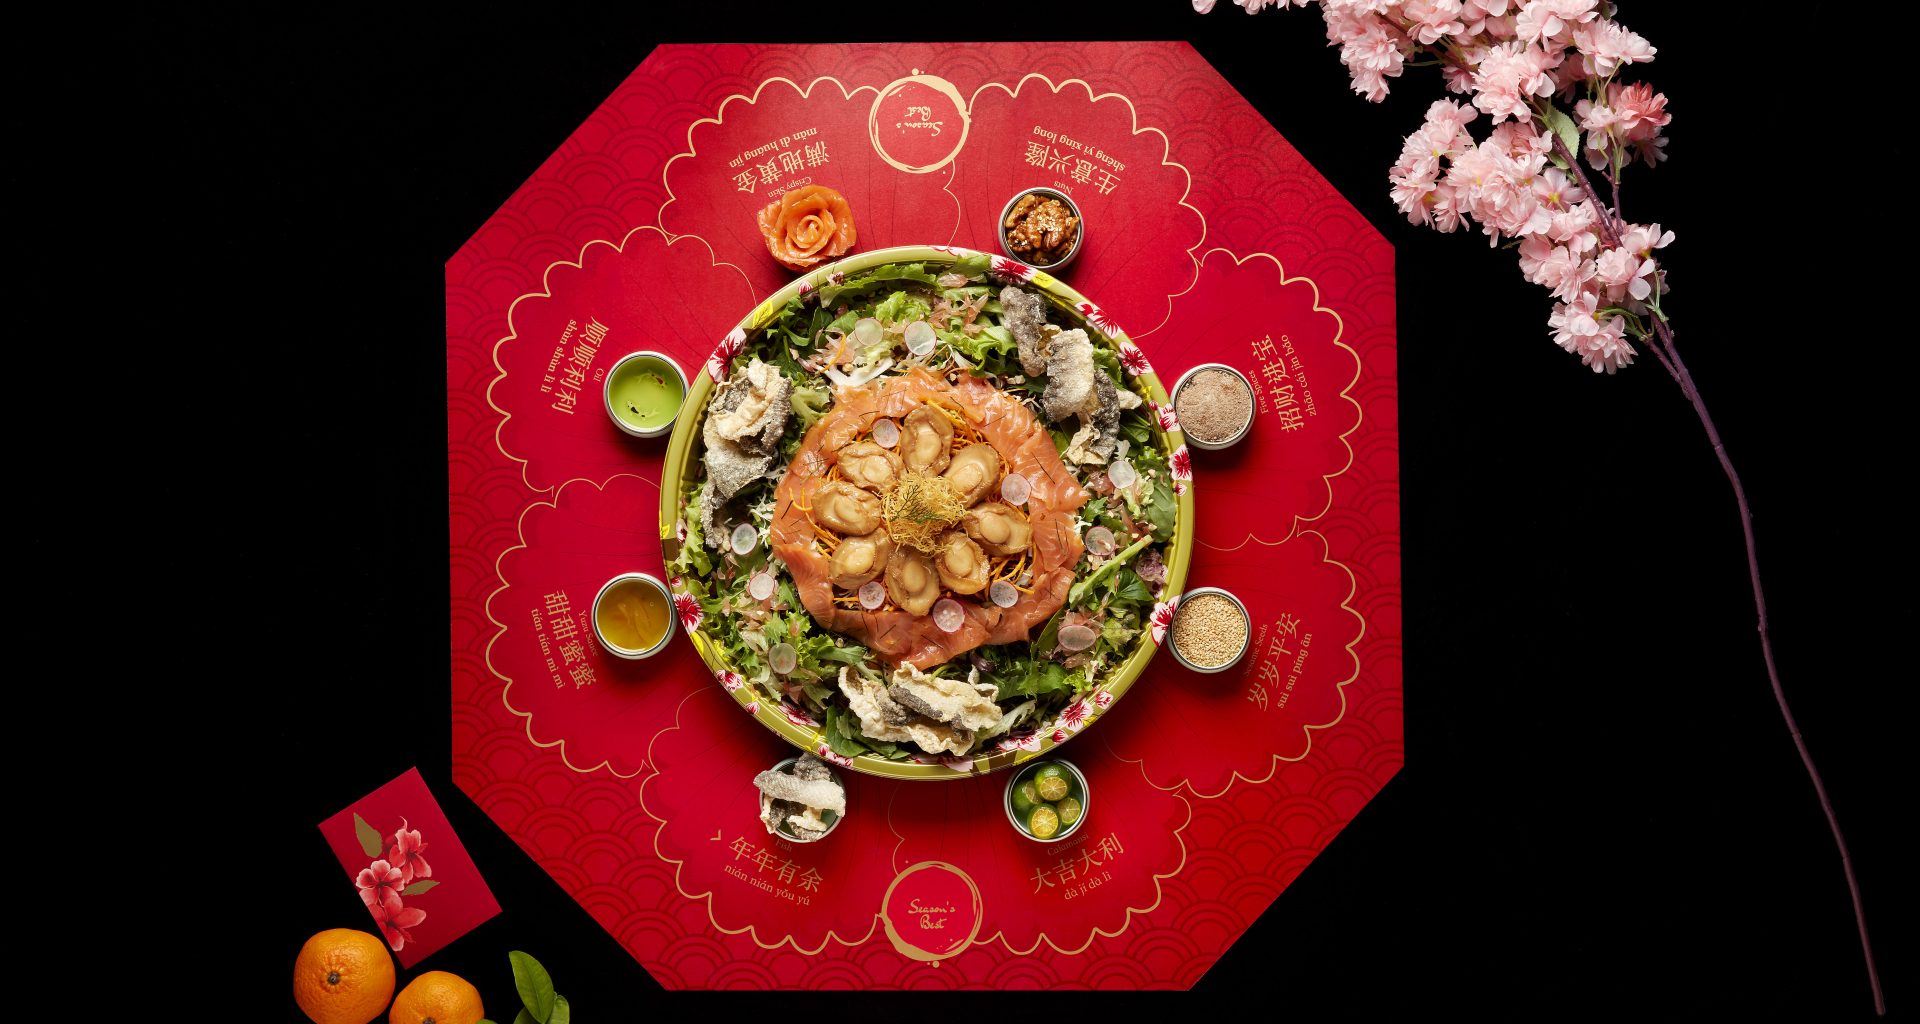 Lohei at home in luxury with Season's Best this CNY - Alvinology